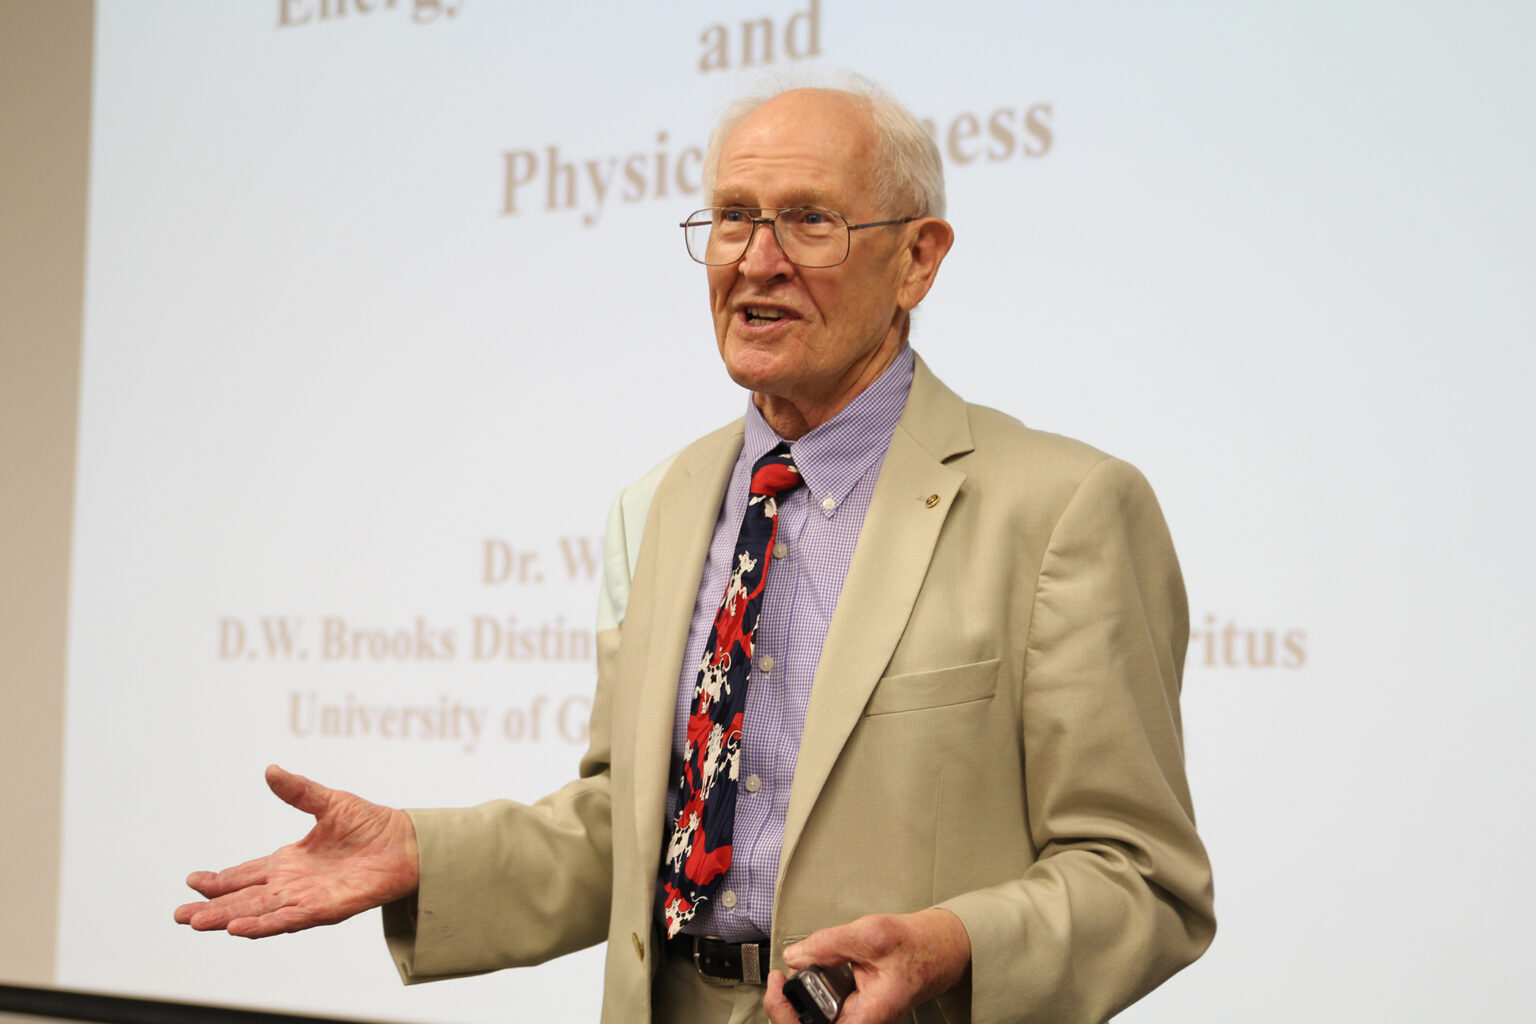 Bill Flatt delivers a lecture in 2014 at the University of Georgia. (Photo by Cal Powell)